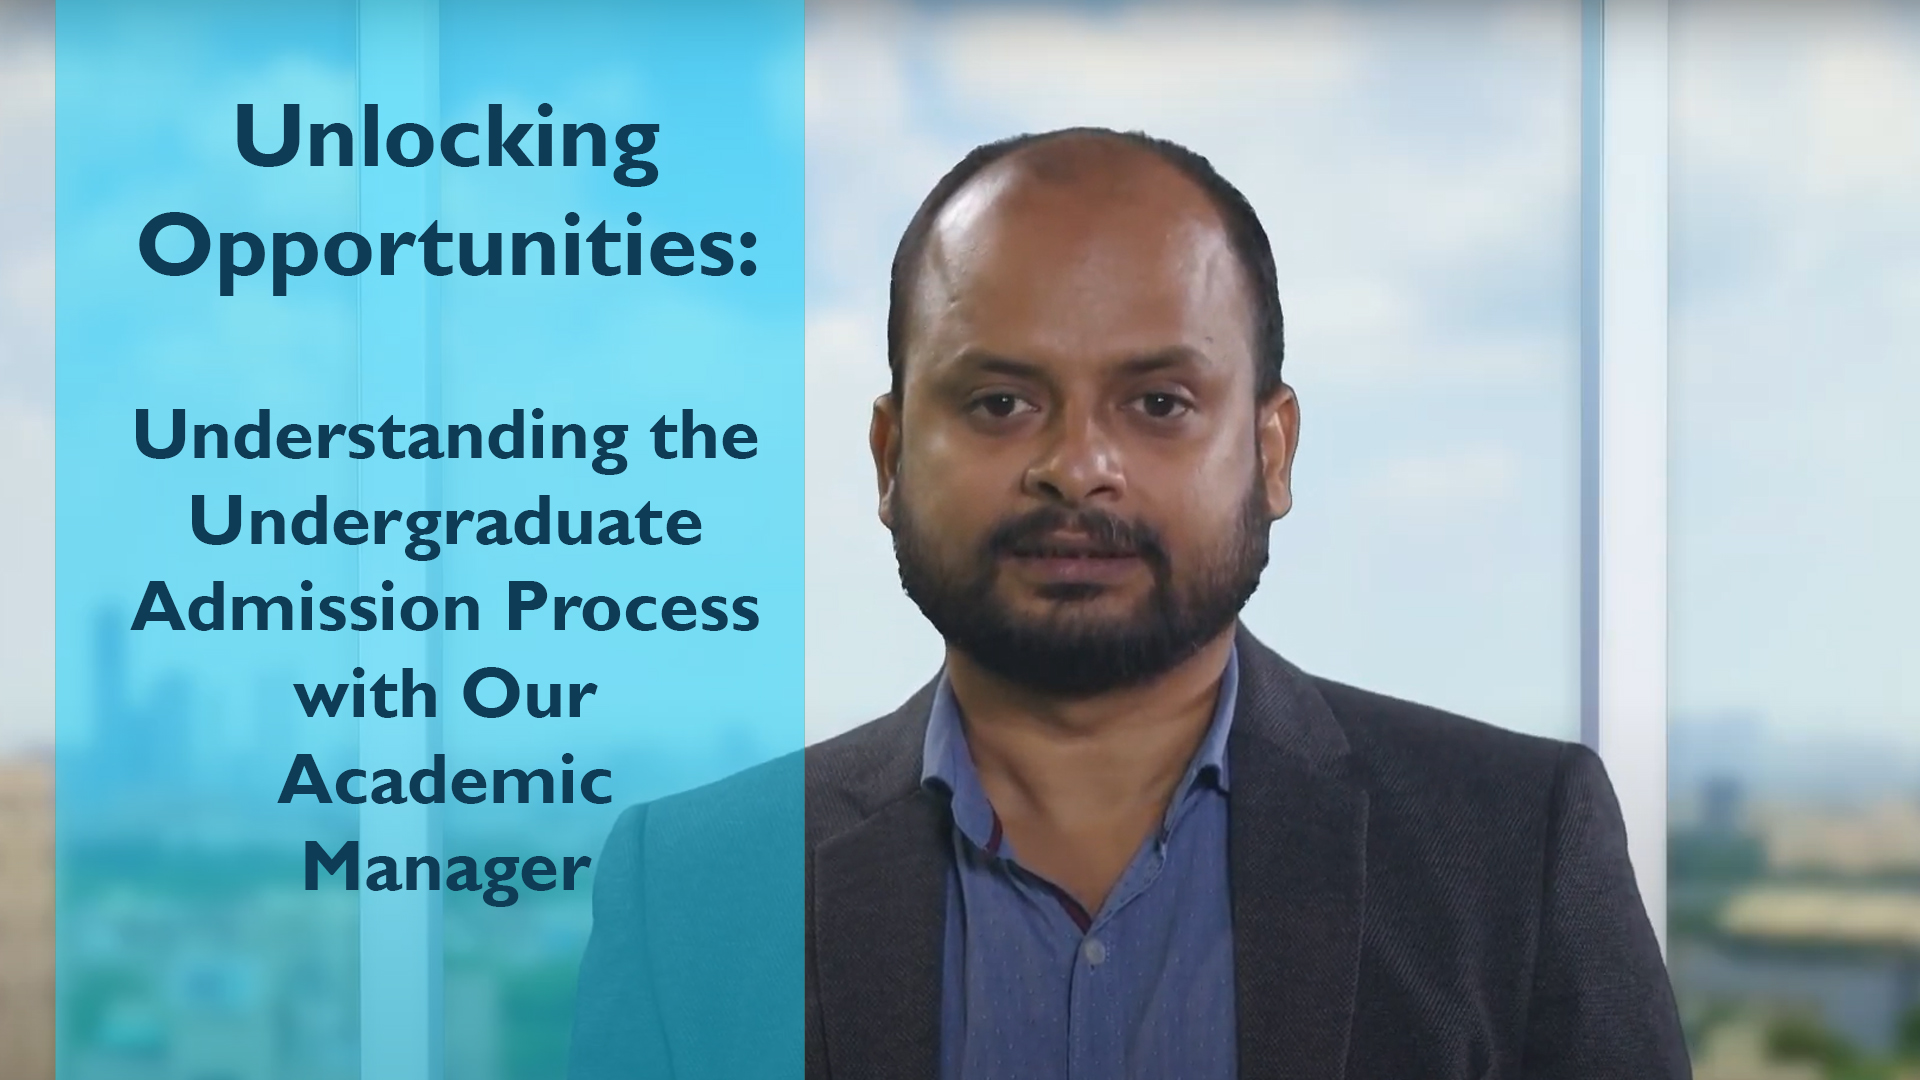 Unlocking Oppotunities: Understanding the Undergraduate Admission Process with Our Academic Manager